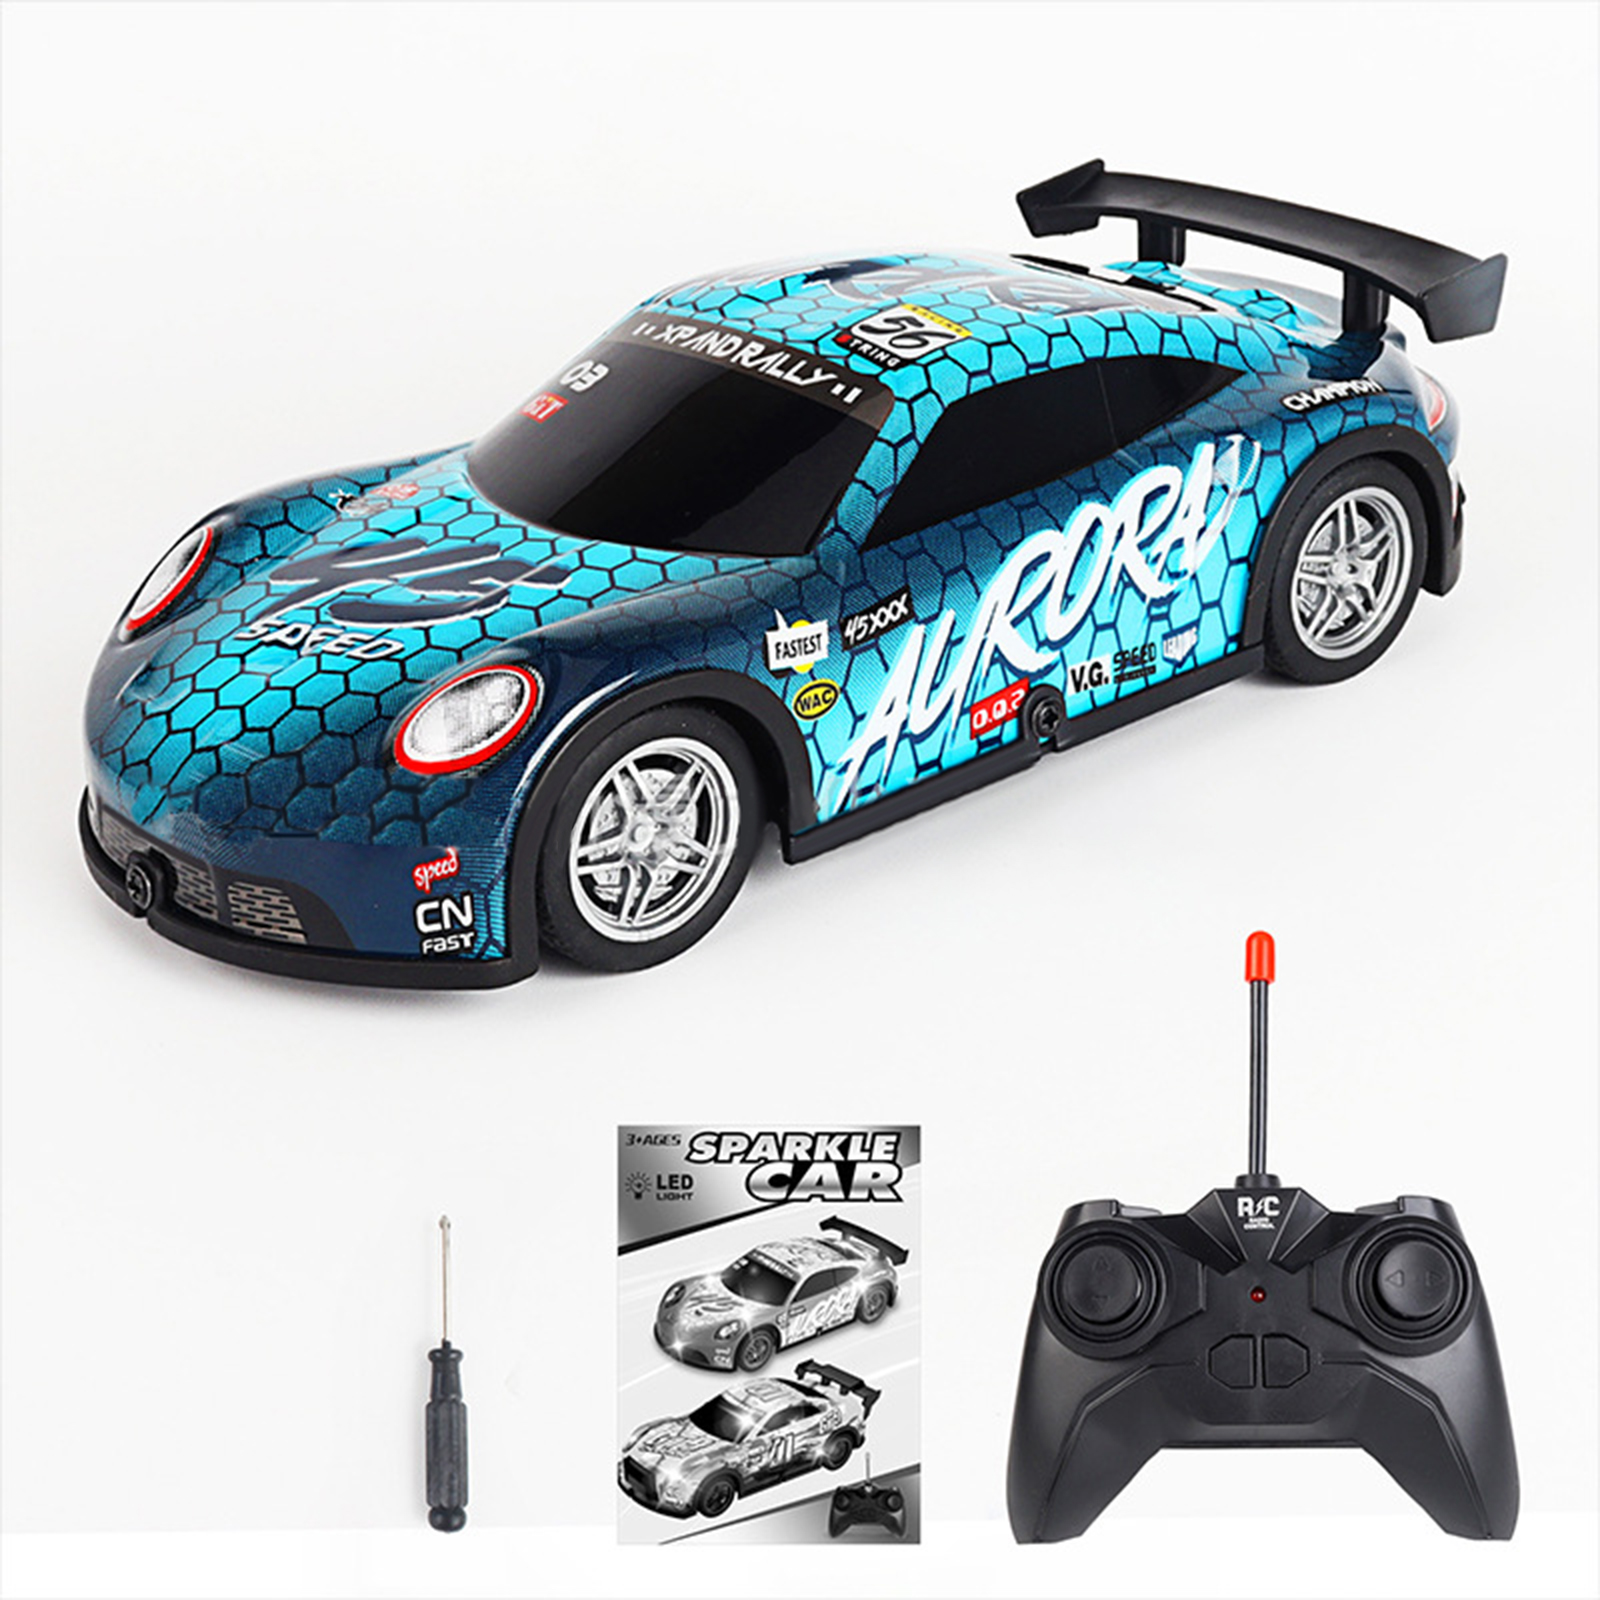 1:22 27HZ Remote Control Racing Car With LED Light 4-Channel Rc Drift Car Model Ornaments Birthday Gifts